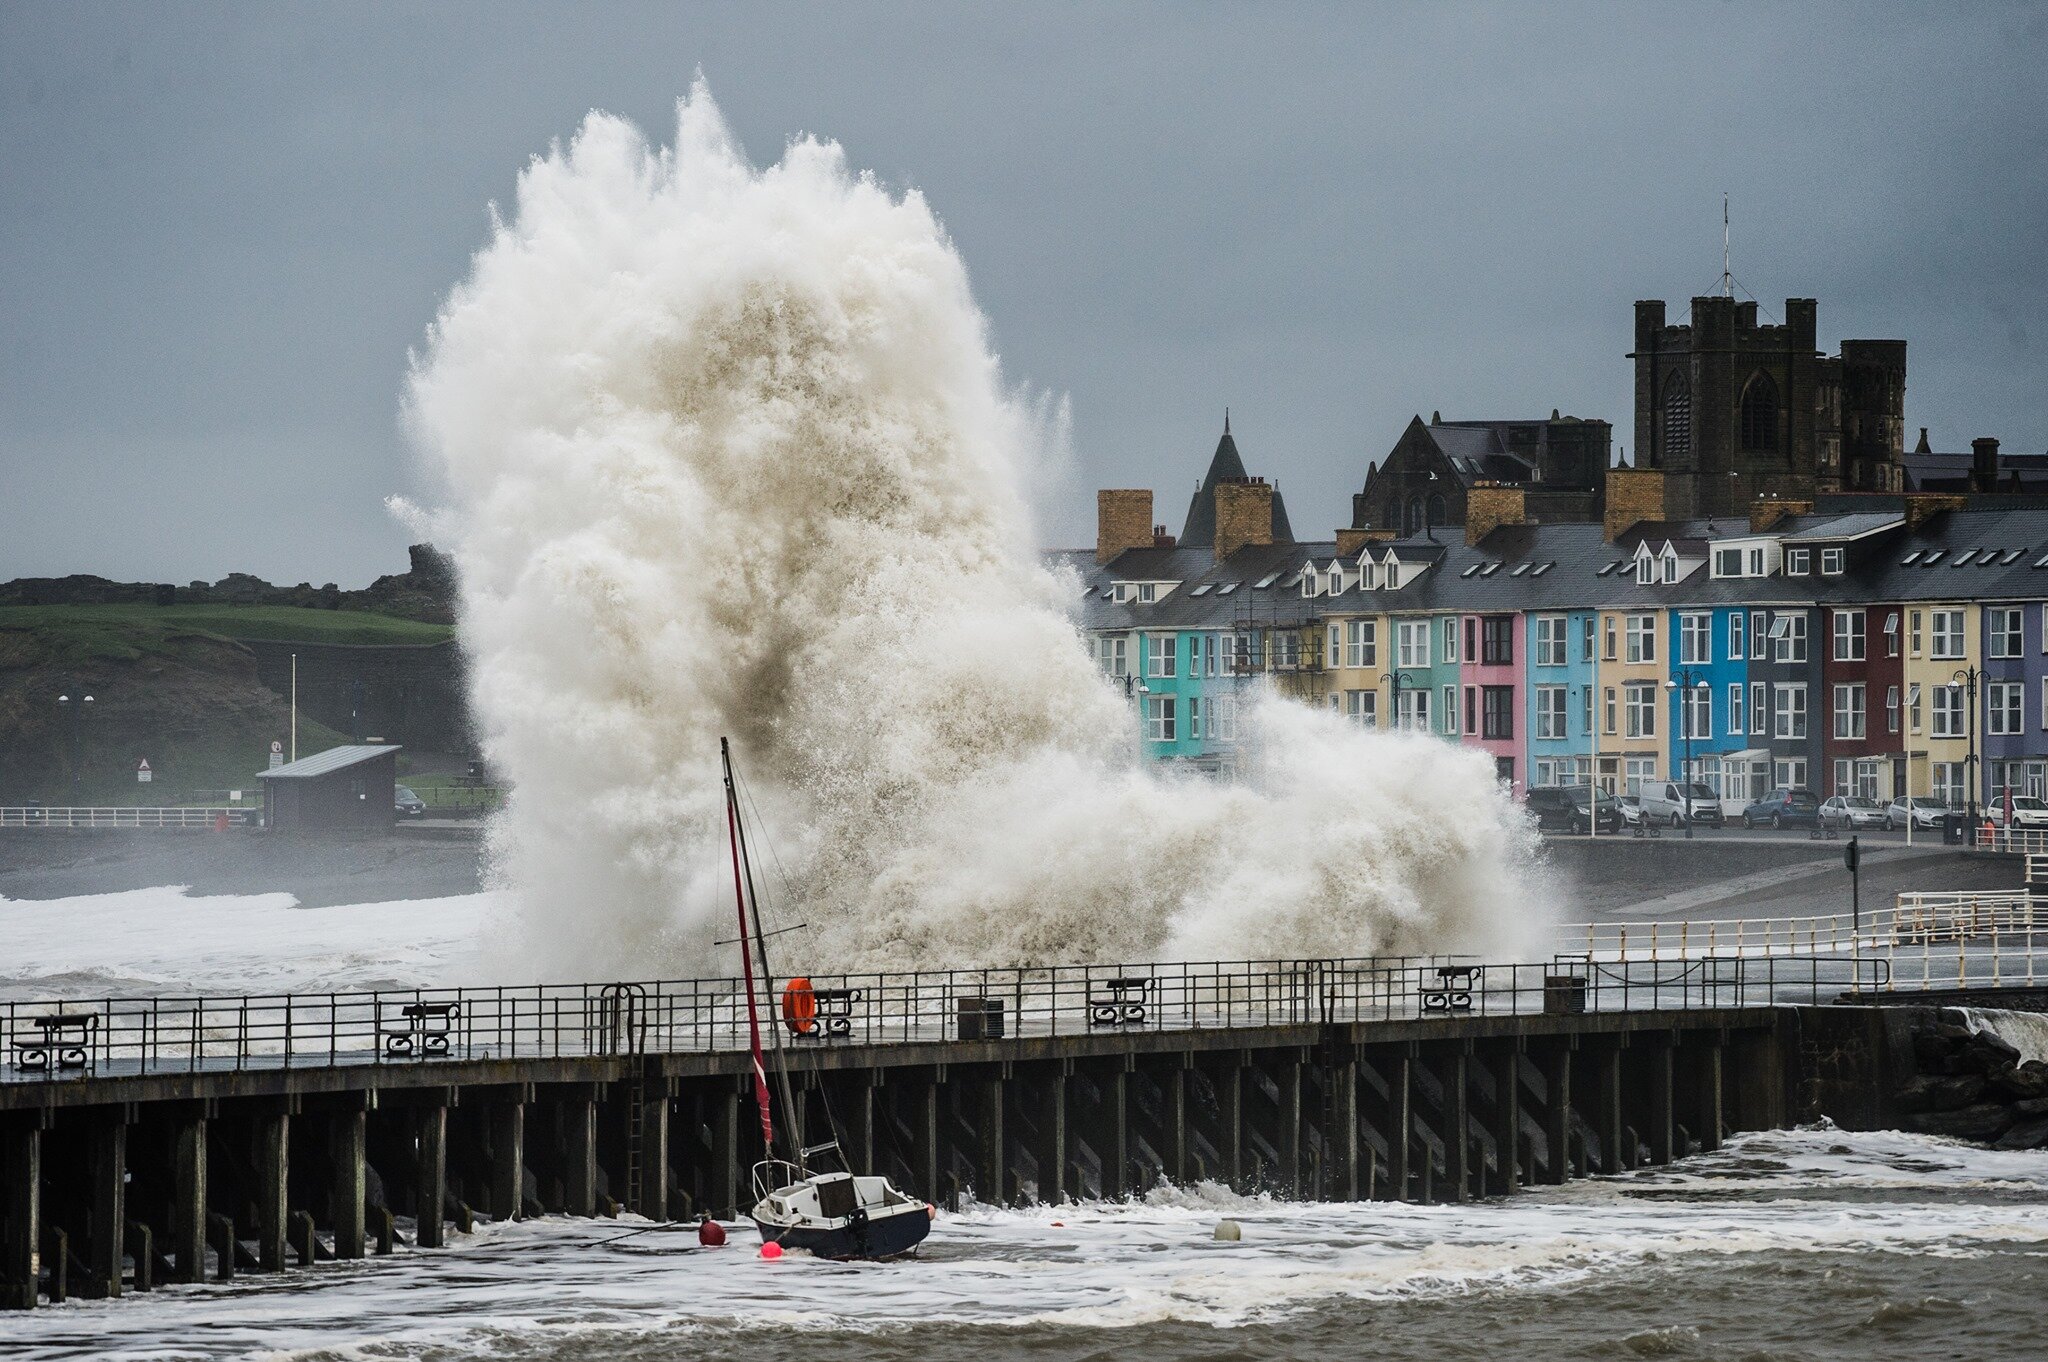 UK Weather: Waves batter the seafront at Aberystwyth Wales